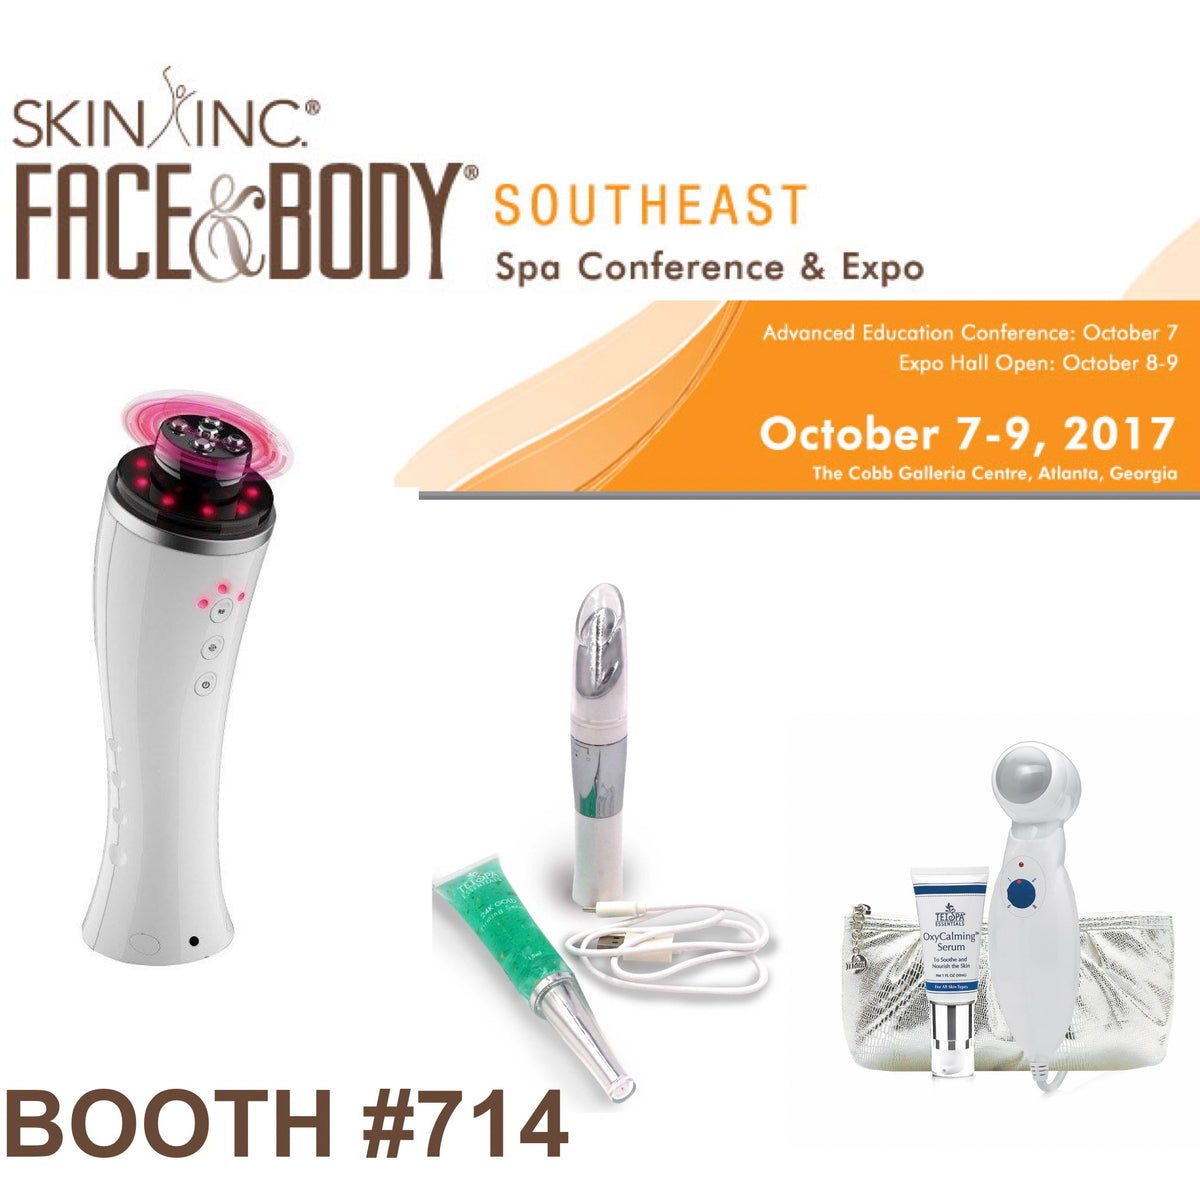 Hey Atlanta, Georgia! Register Early For The Face & Body Expo to Receive a Discount!